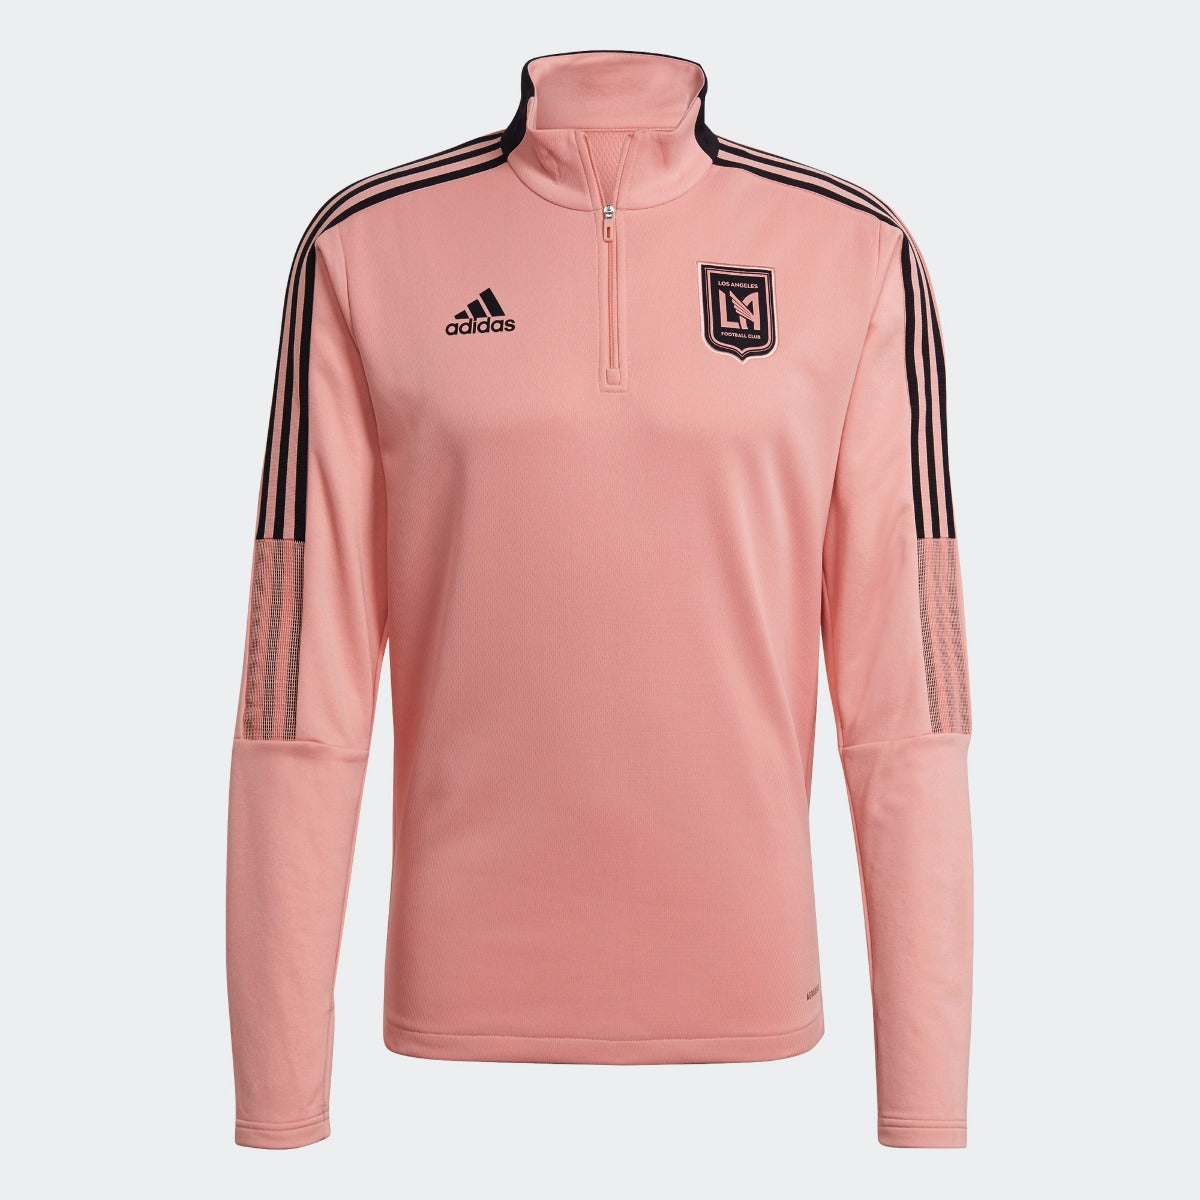 Adidas 2021-22 LAFC Warm-Up Top - Trace Pink